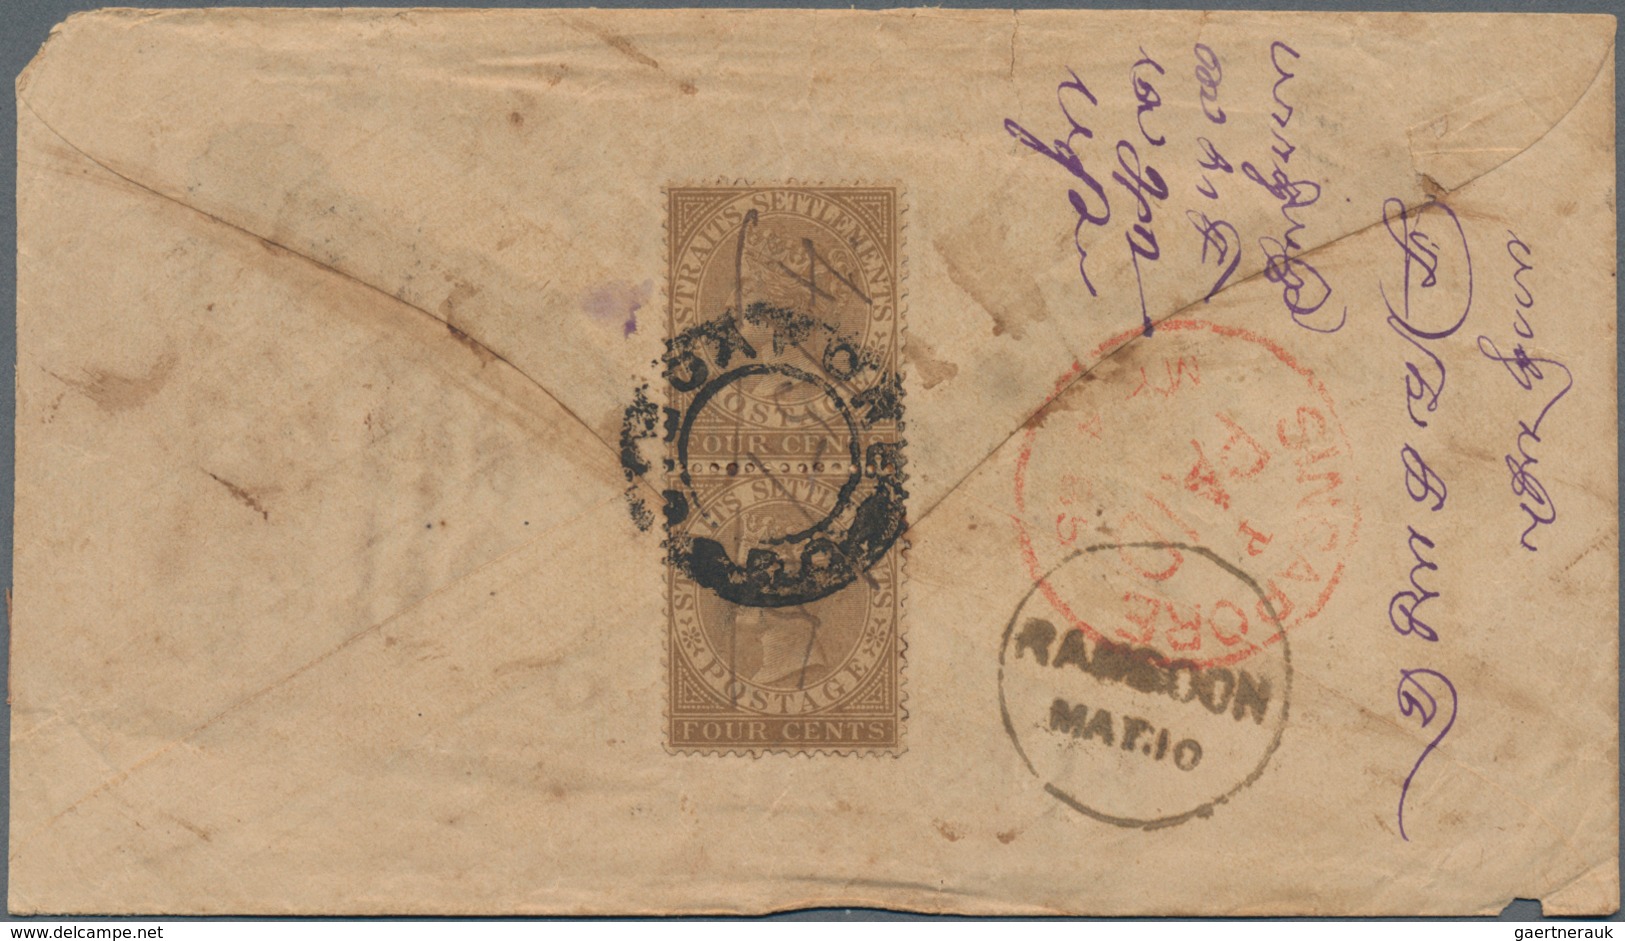 Singapur: 1885 Cover From Singapore To Rangoon, Burma Franked On The Reverse By Straits 4c. Brown Ve - Singapore (...-1959)